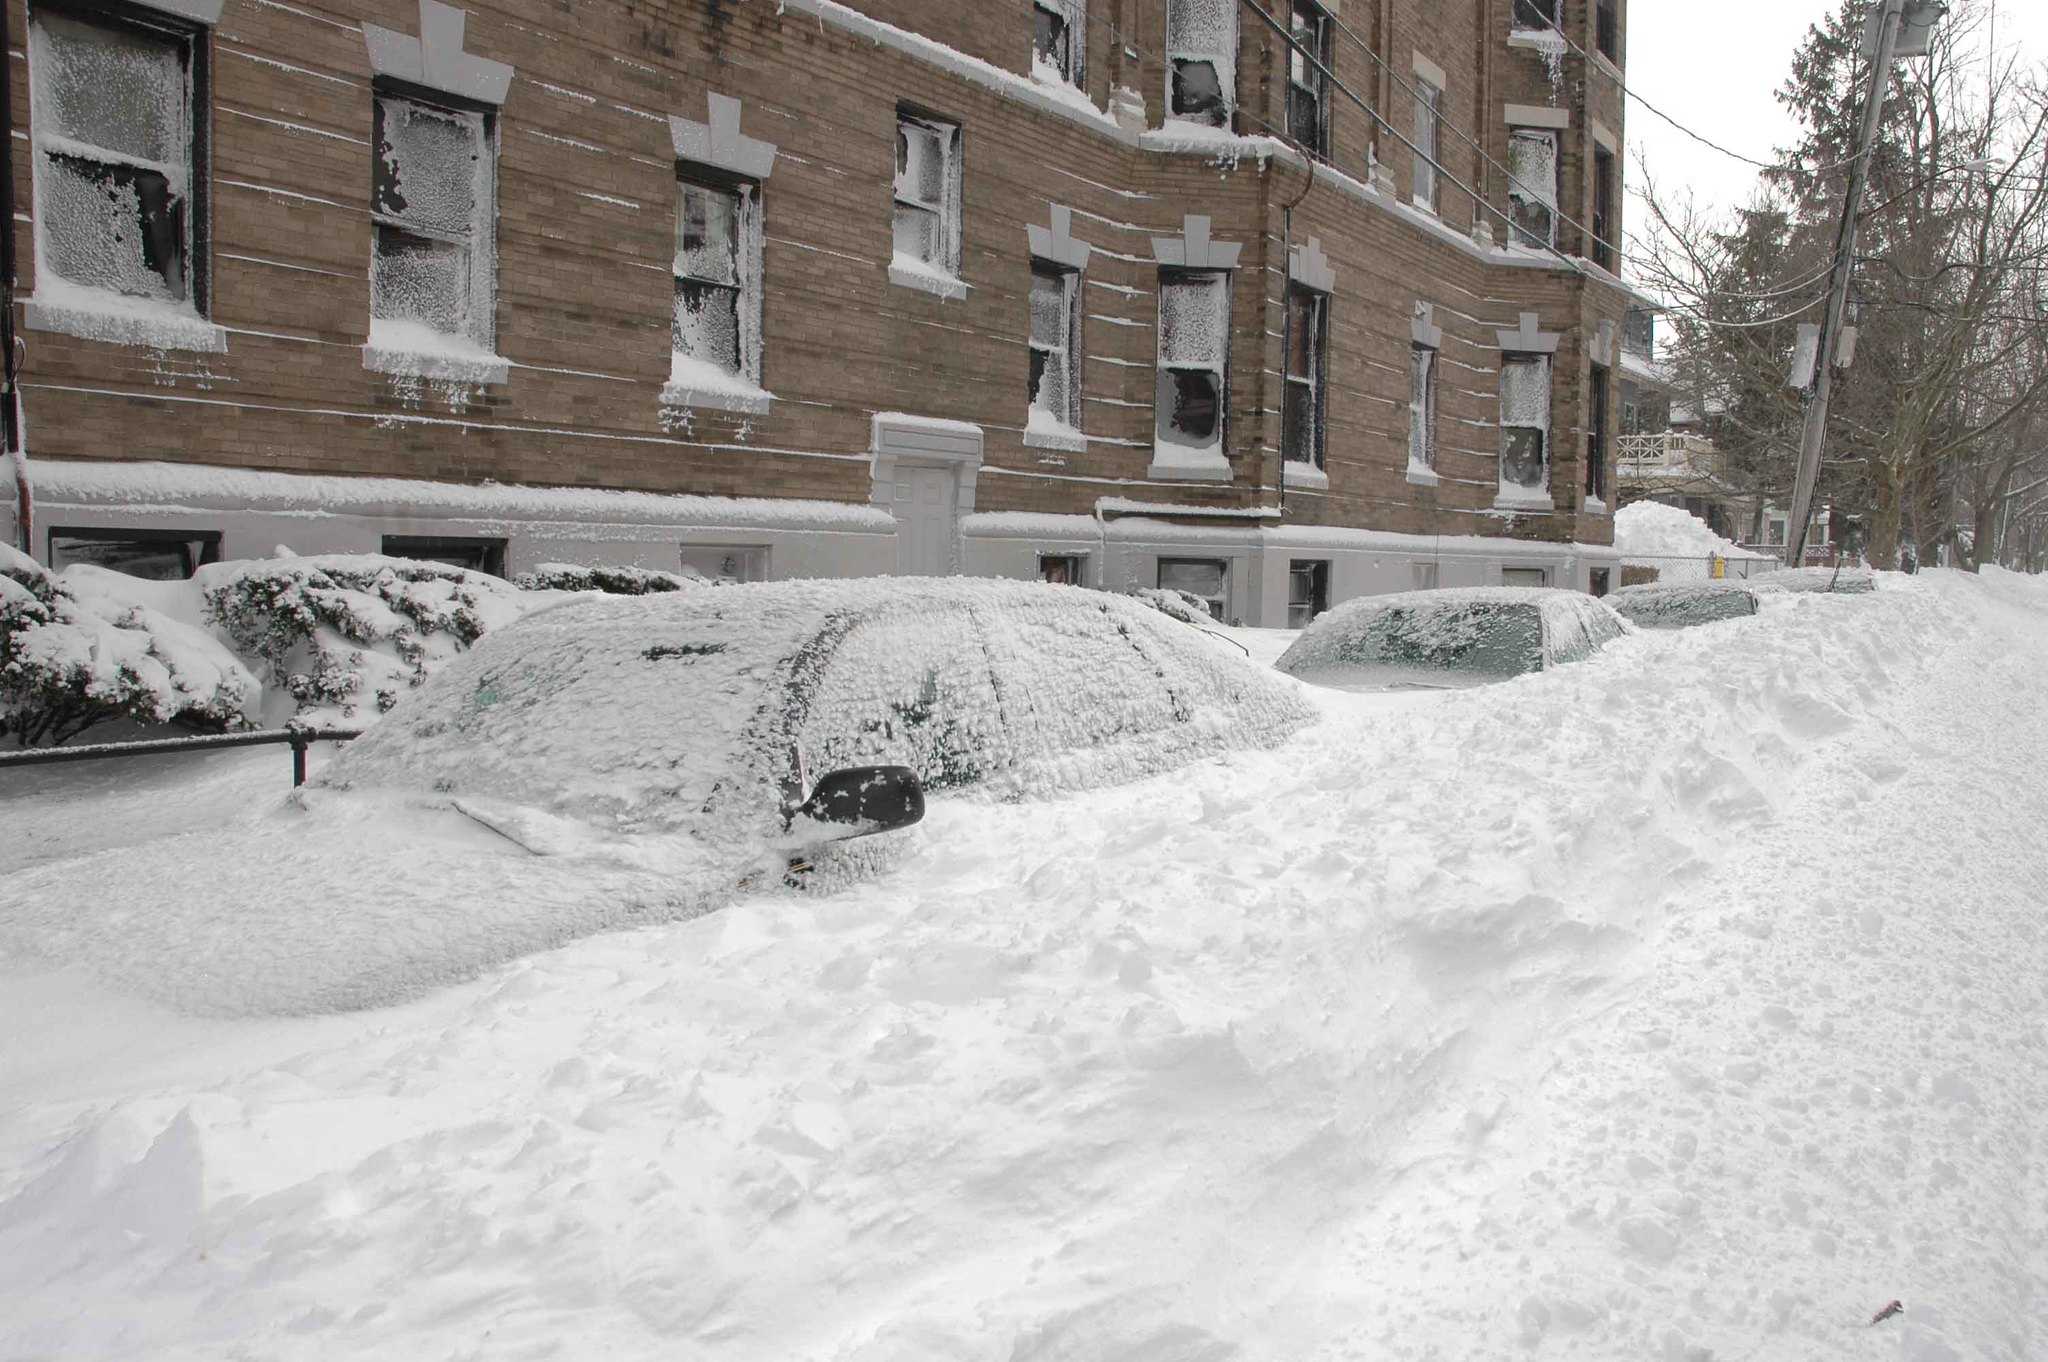 Photo of a street filled with snow and parked cars buried in snow near a building